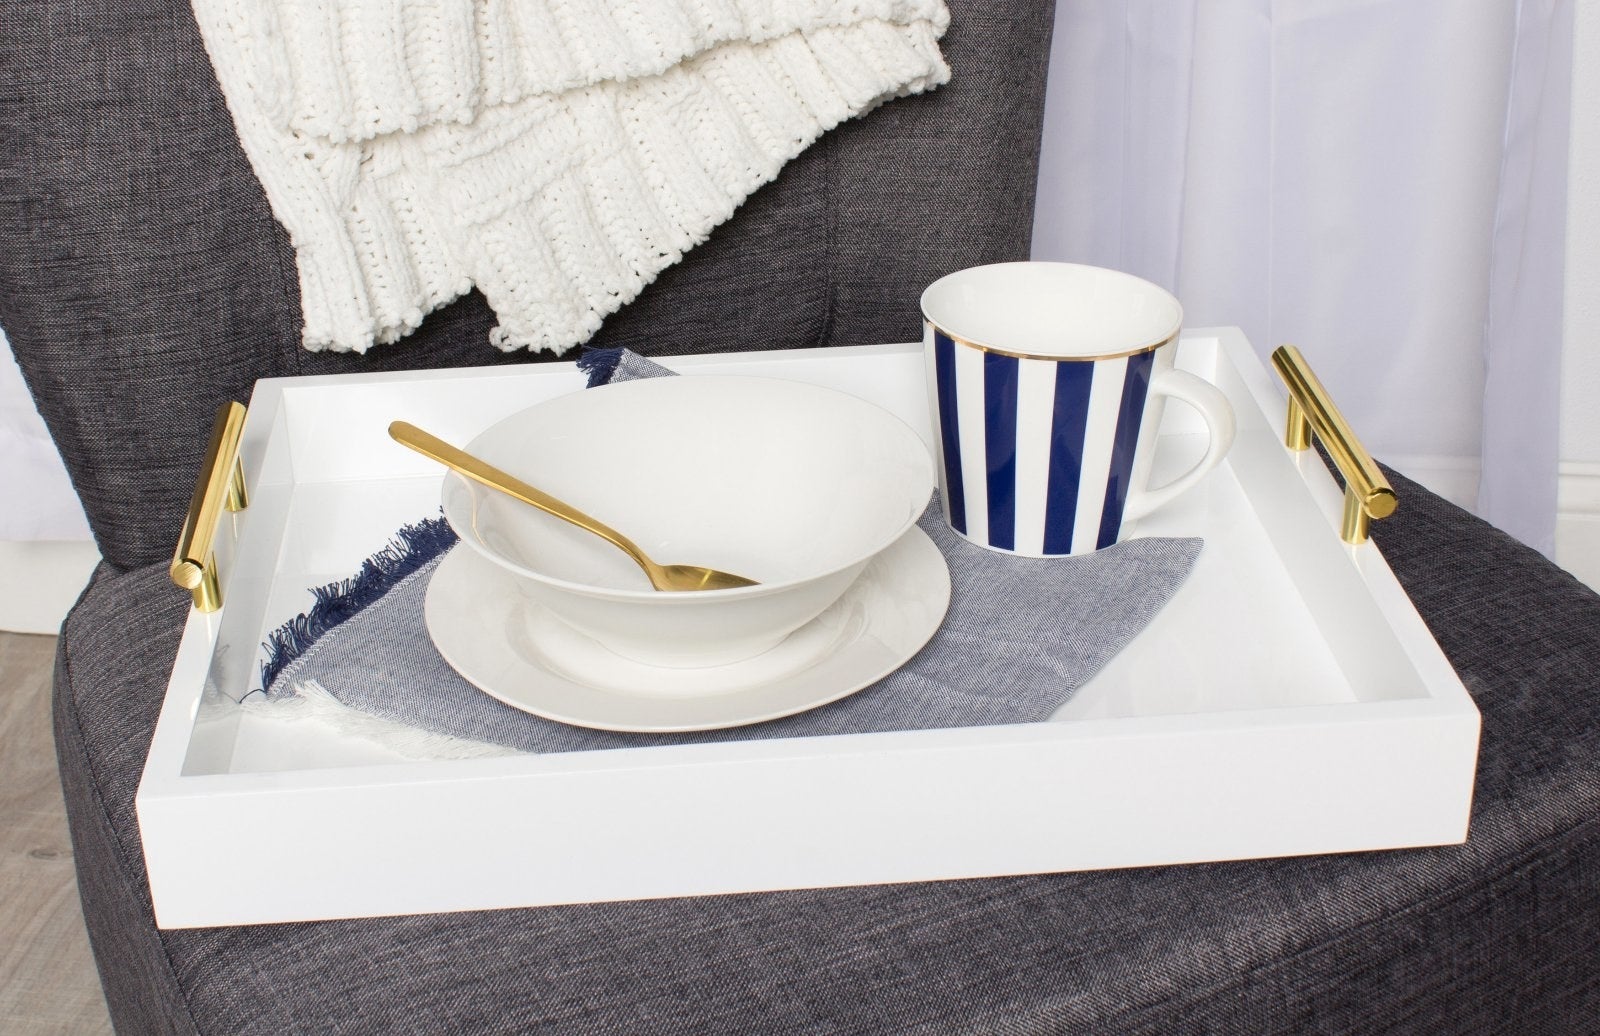 White decorative tray with gold handles on chair with bowl and cup